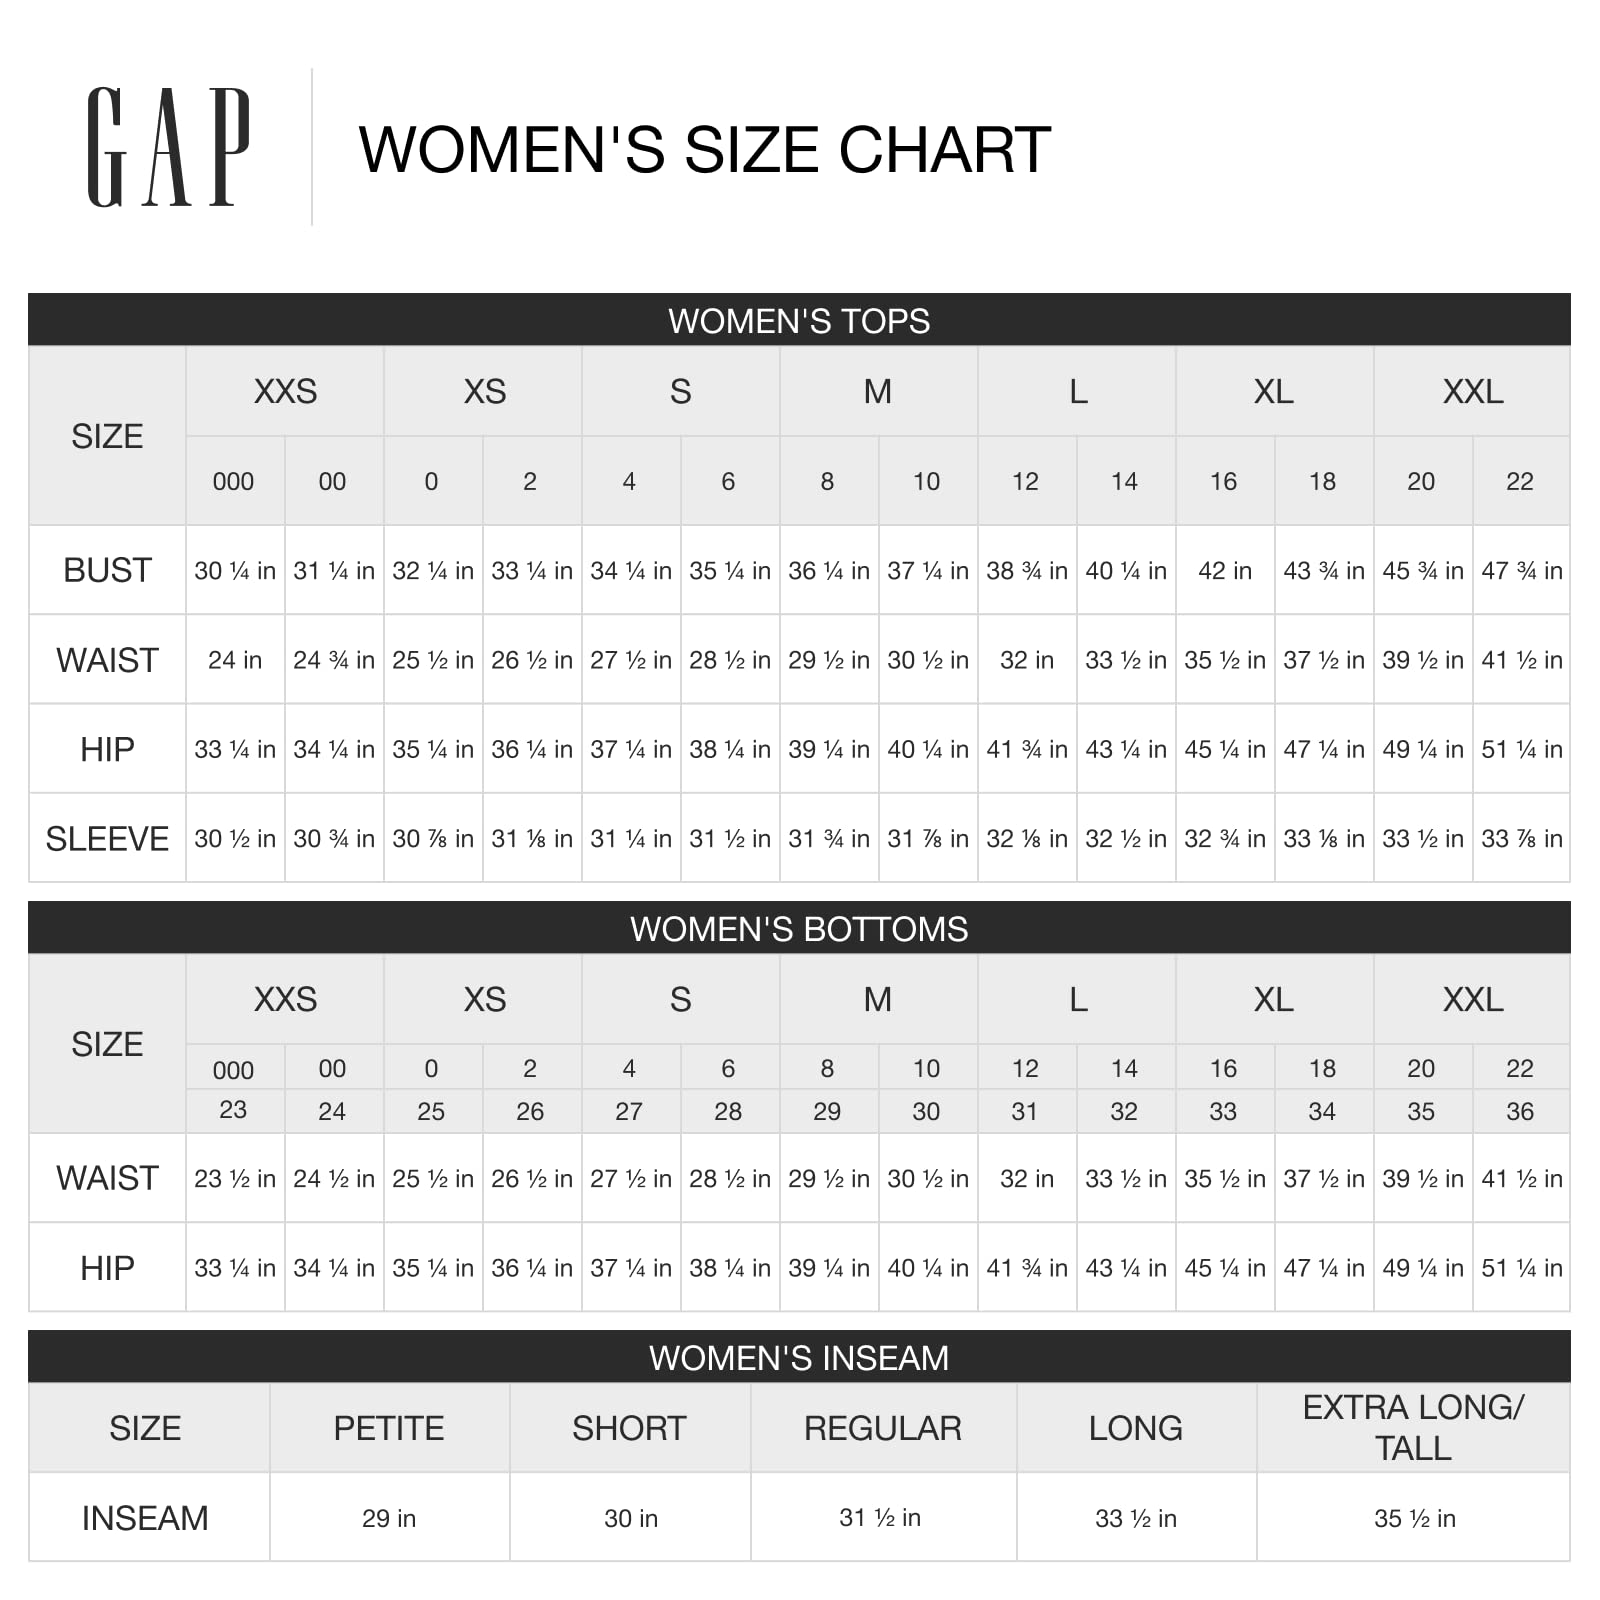 GAP Women's Fitted Cami Top